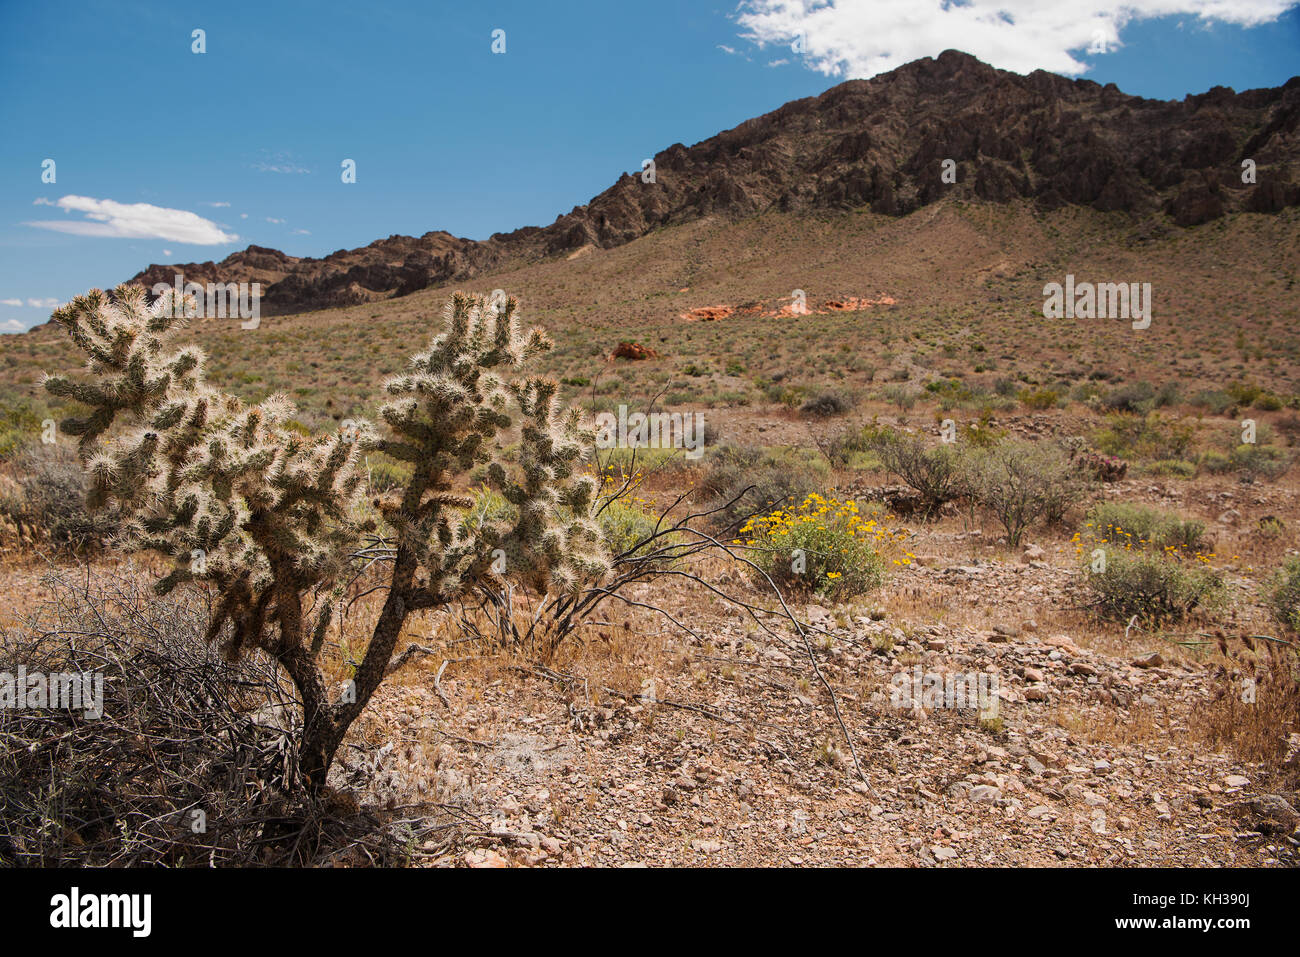 Cactus in the desert under a bright blue sky near Valley of Fire State Park, Nevada Stock Photo